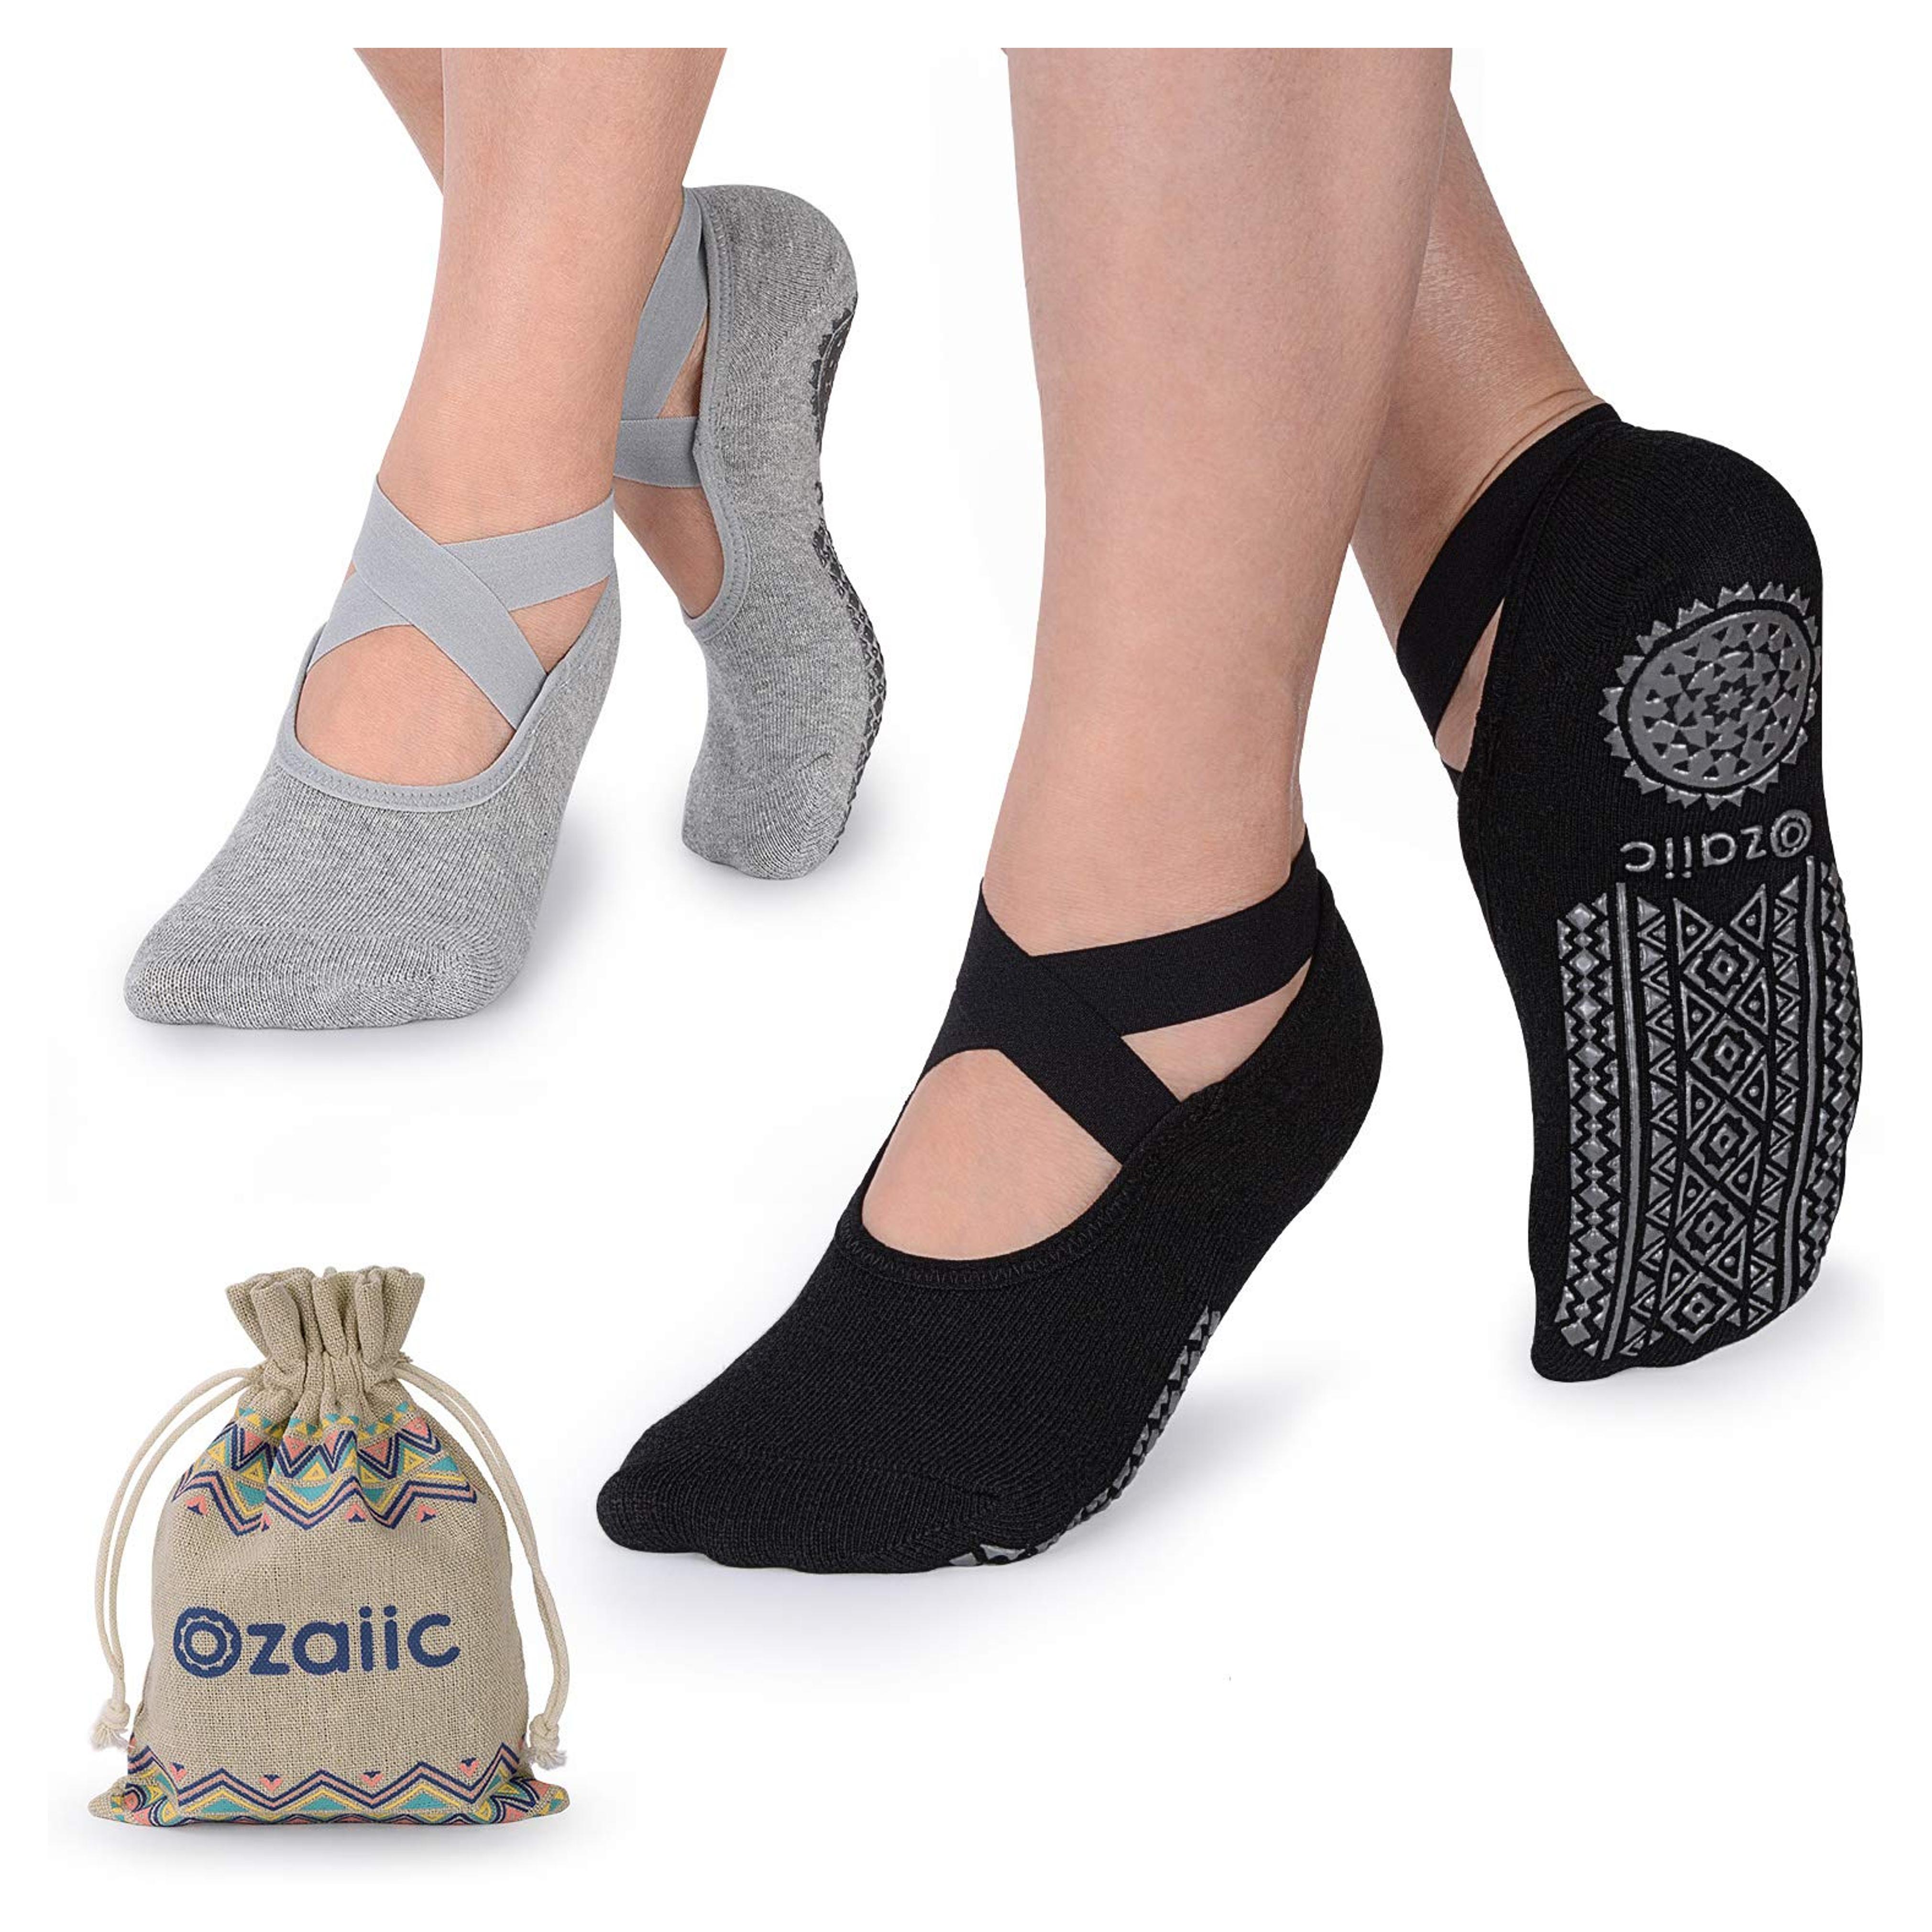 Amazon.com : Yoga Socks for Women Non-Slip Grips & Straps, Ideal for Pilates, Pure Barre, Ballet, Dance, Barefoot Workout (2 Pairs- Black/Gray, one_size) : Clothing, Shoes & Jewelry